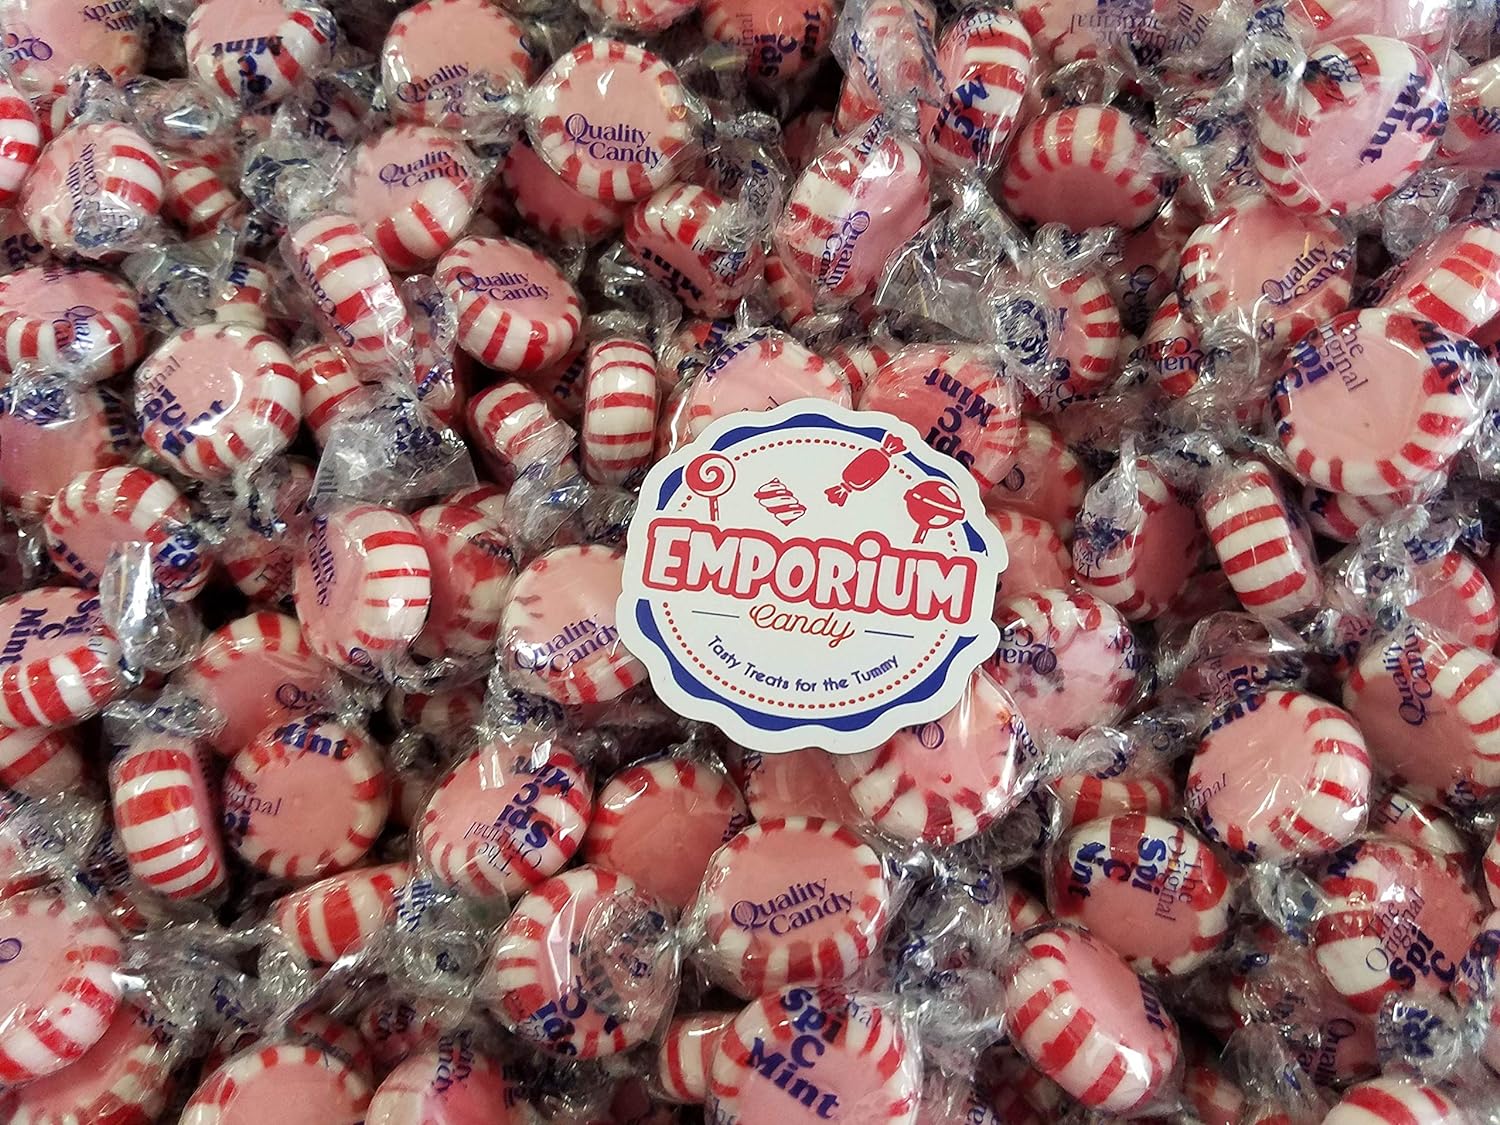 Spi-C-Mints Cinnamon - 2 lbs of Individually Wrapped Assorte